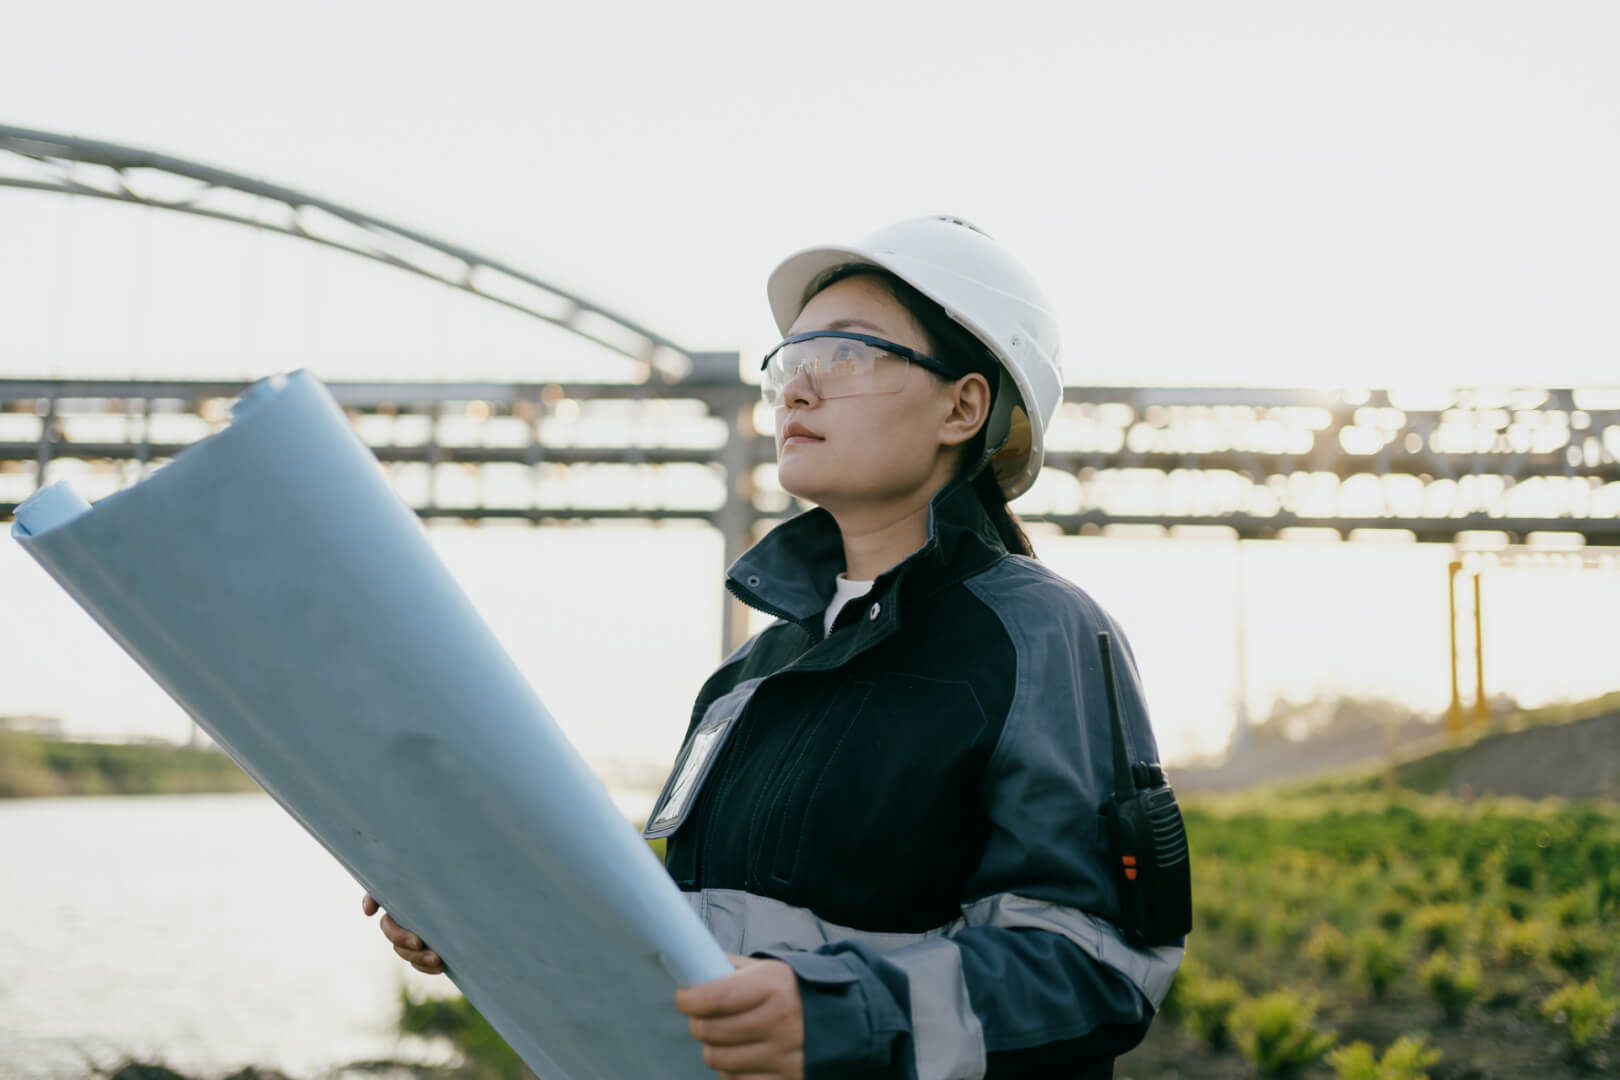 A woman outside - as a field engineer